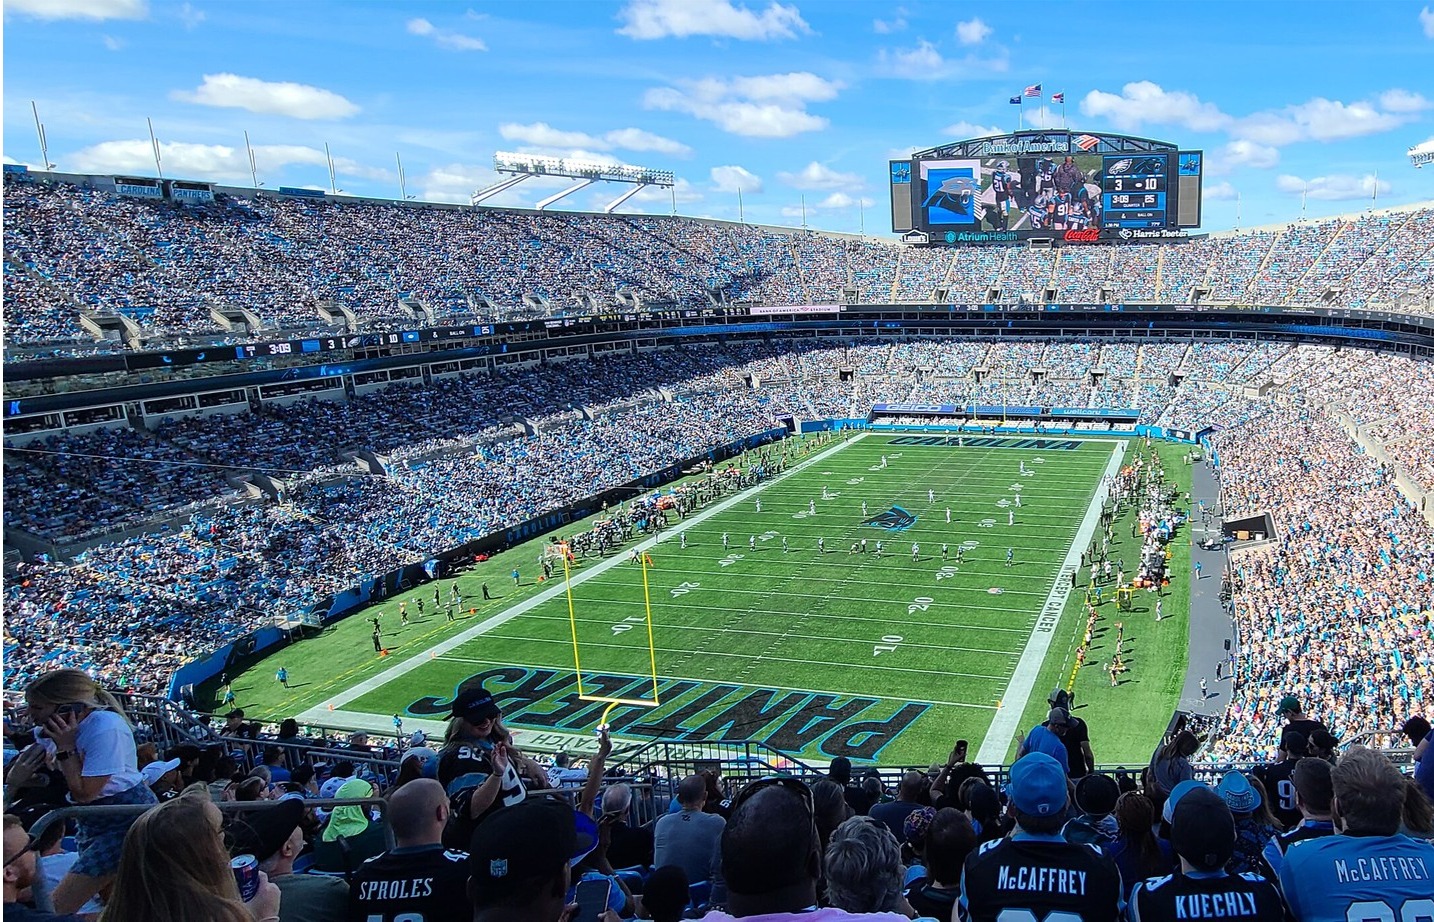 game at bank of america stadium today